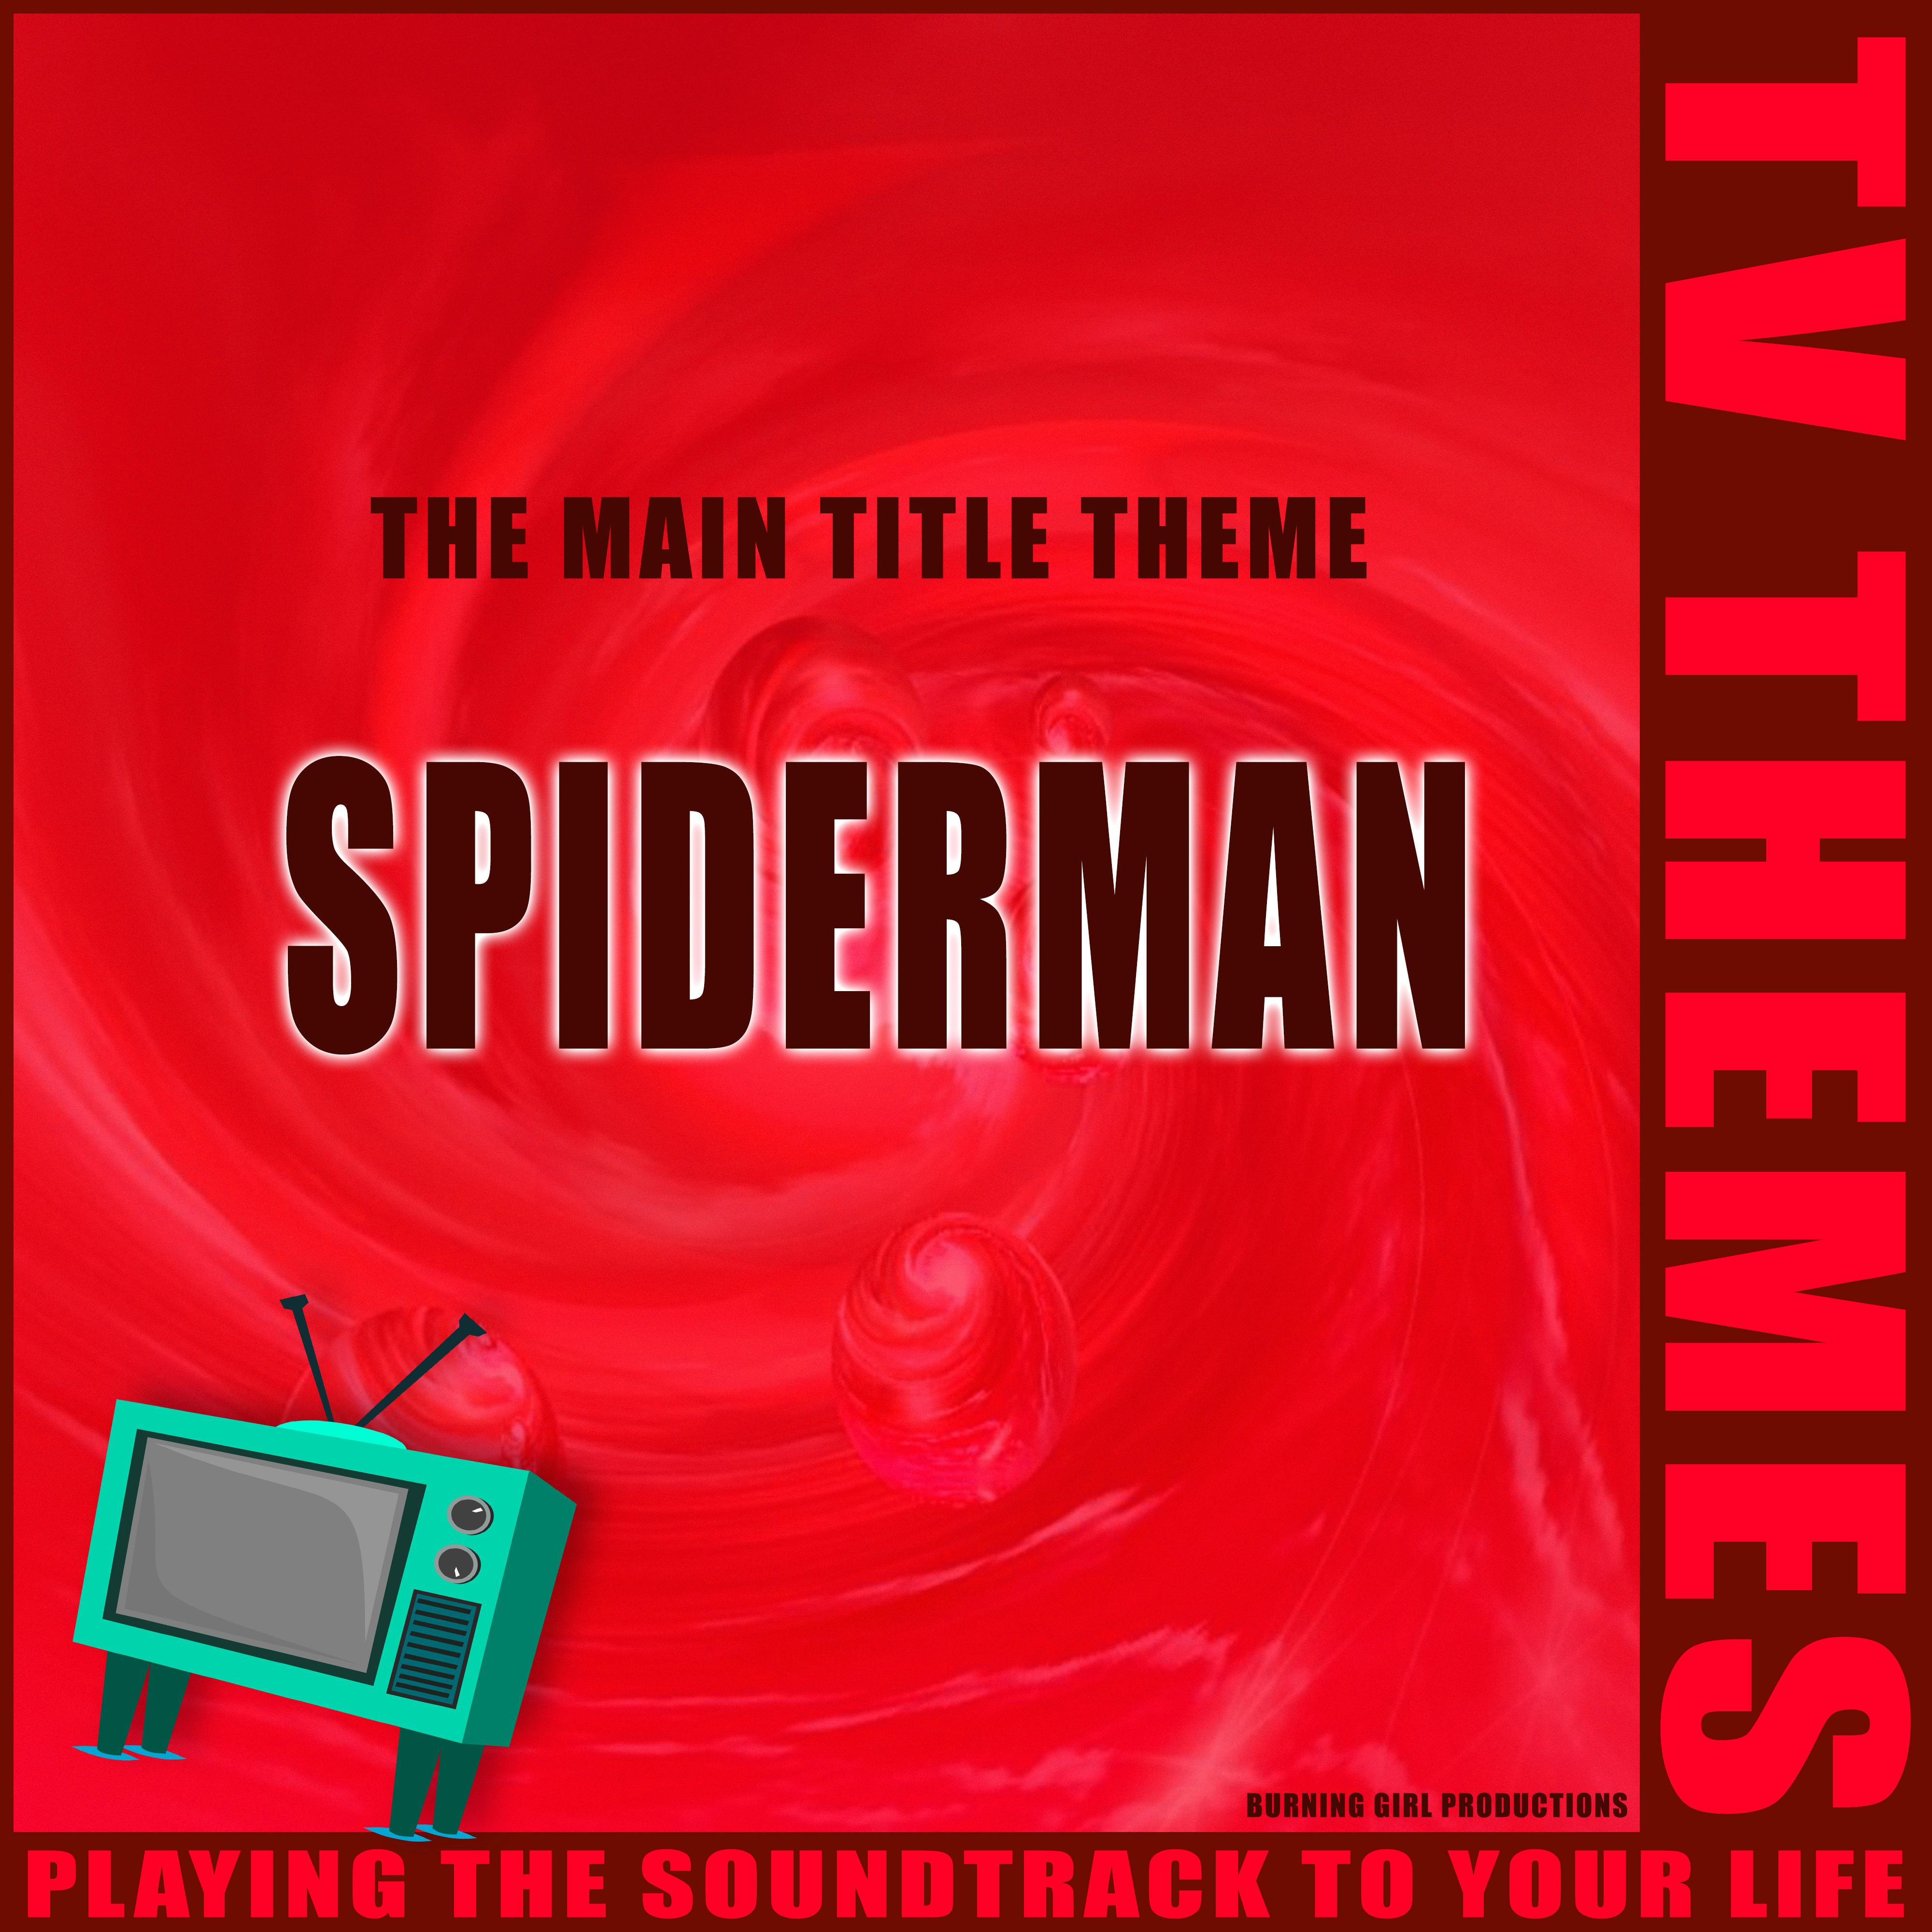 The Main Title Theme - Spiderman